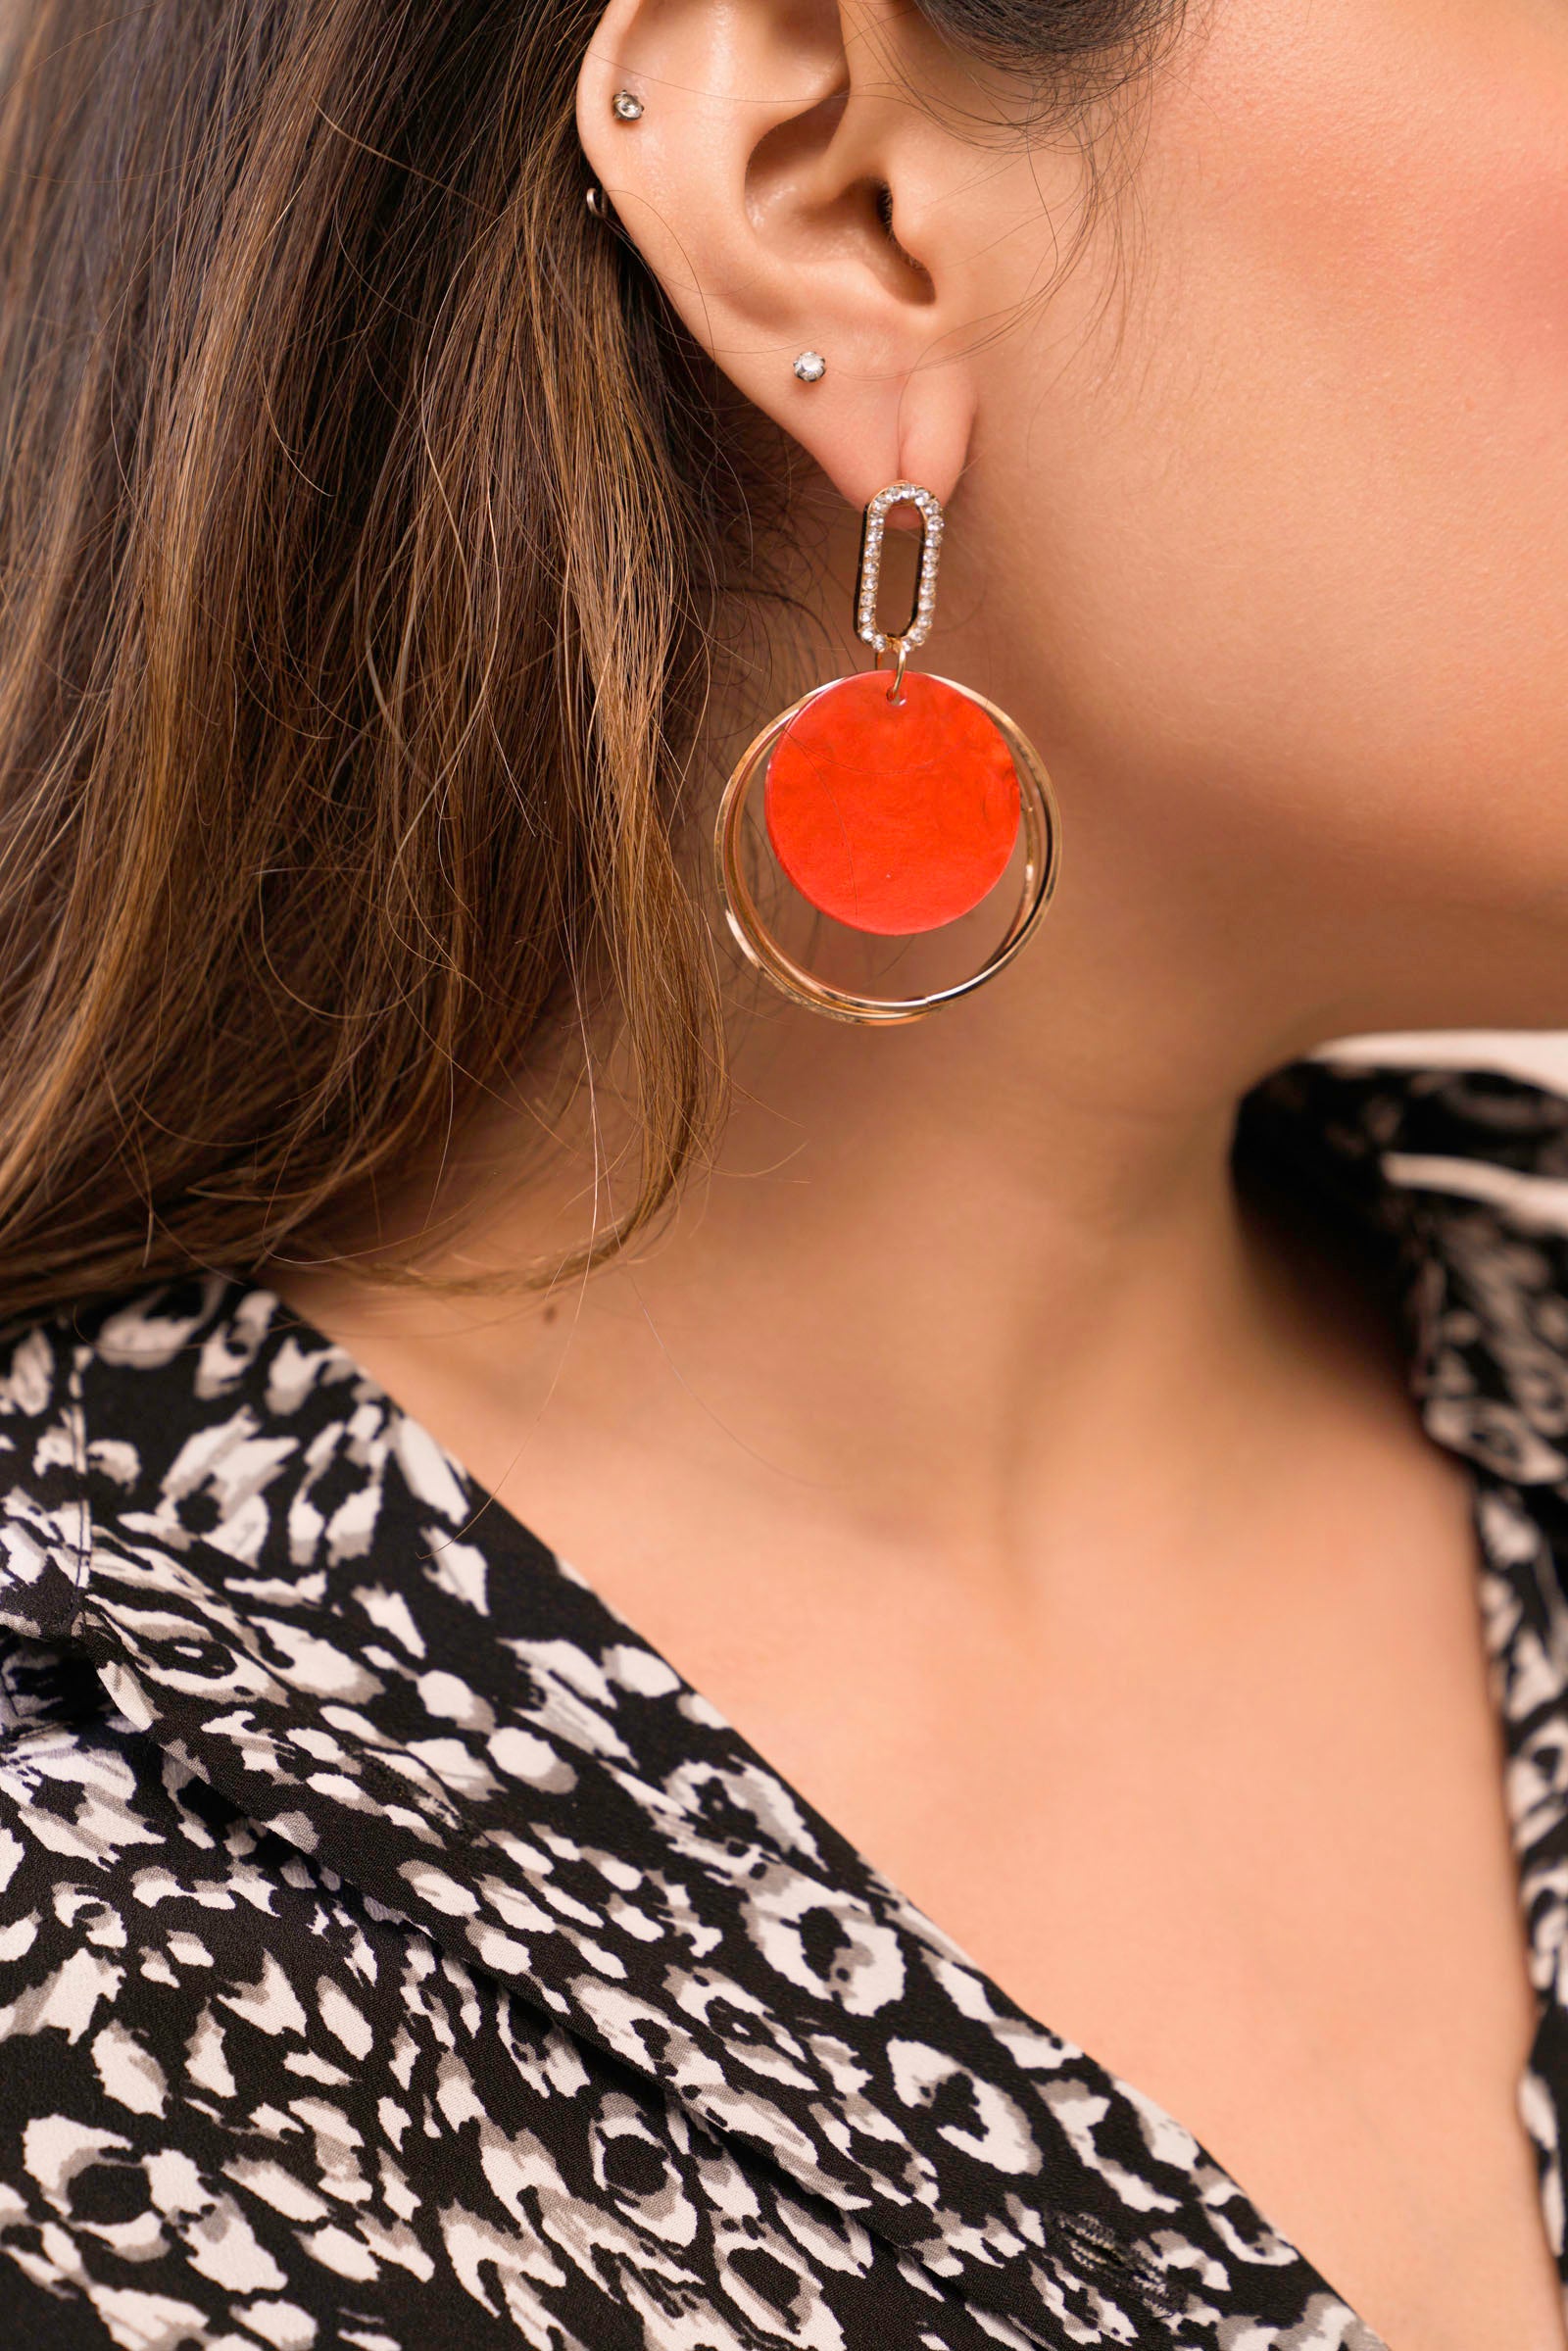 Red &amp; Gold Drop Earrings